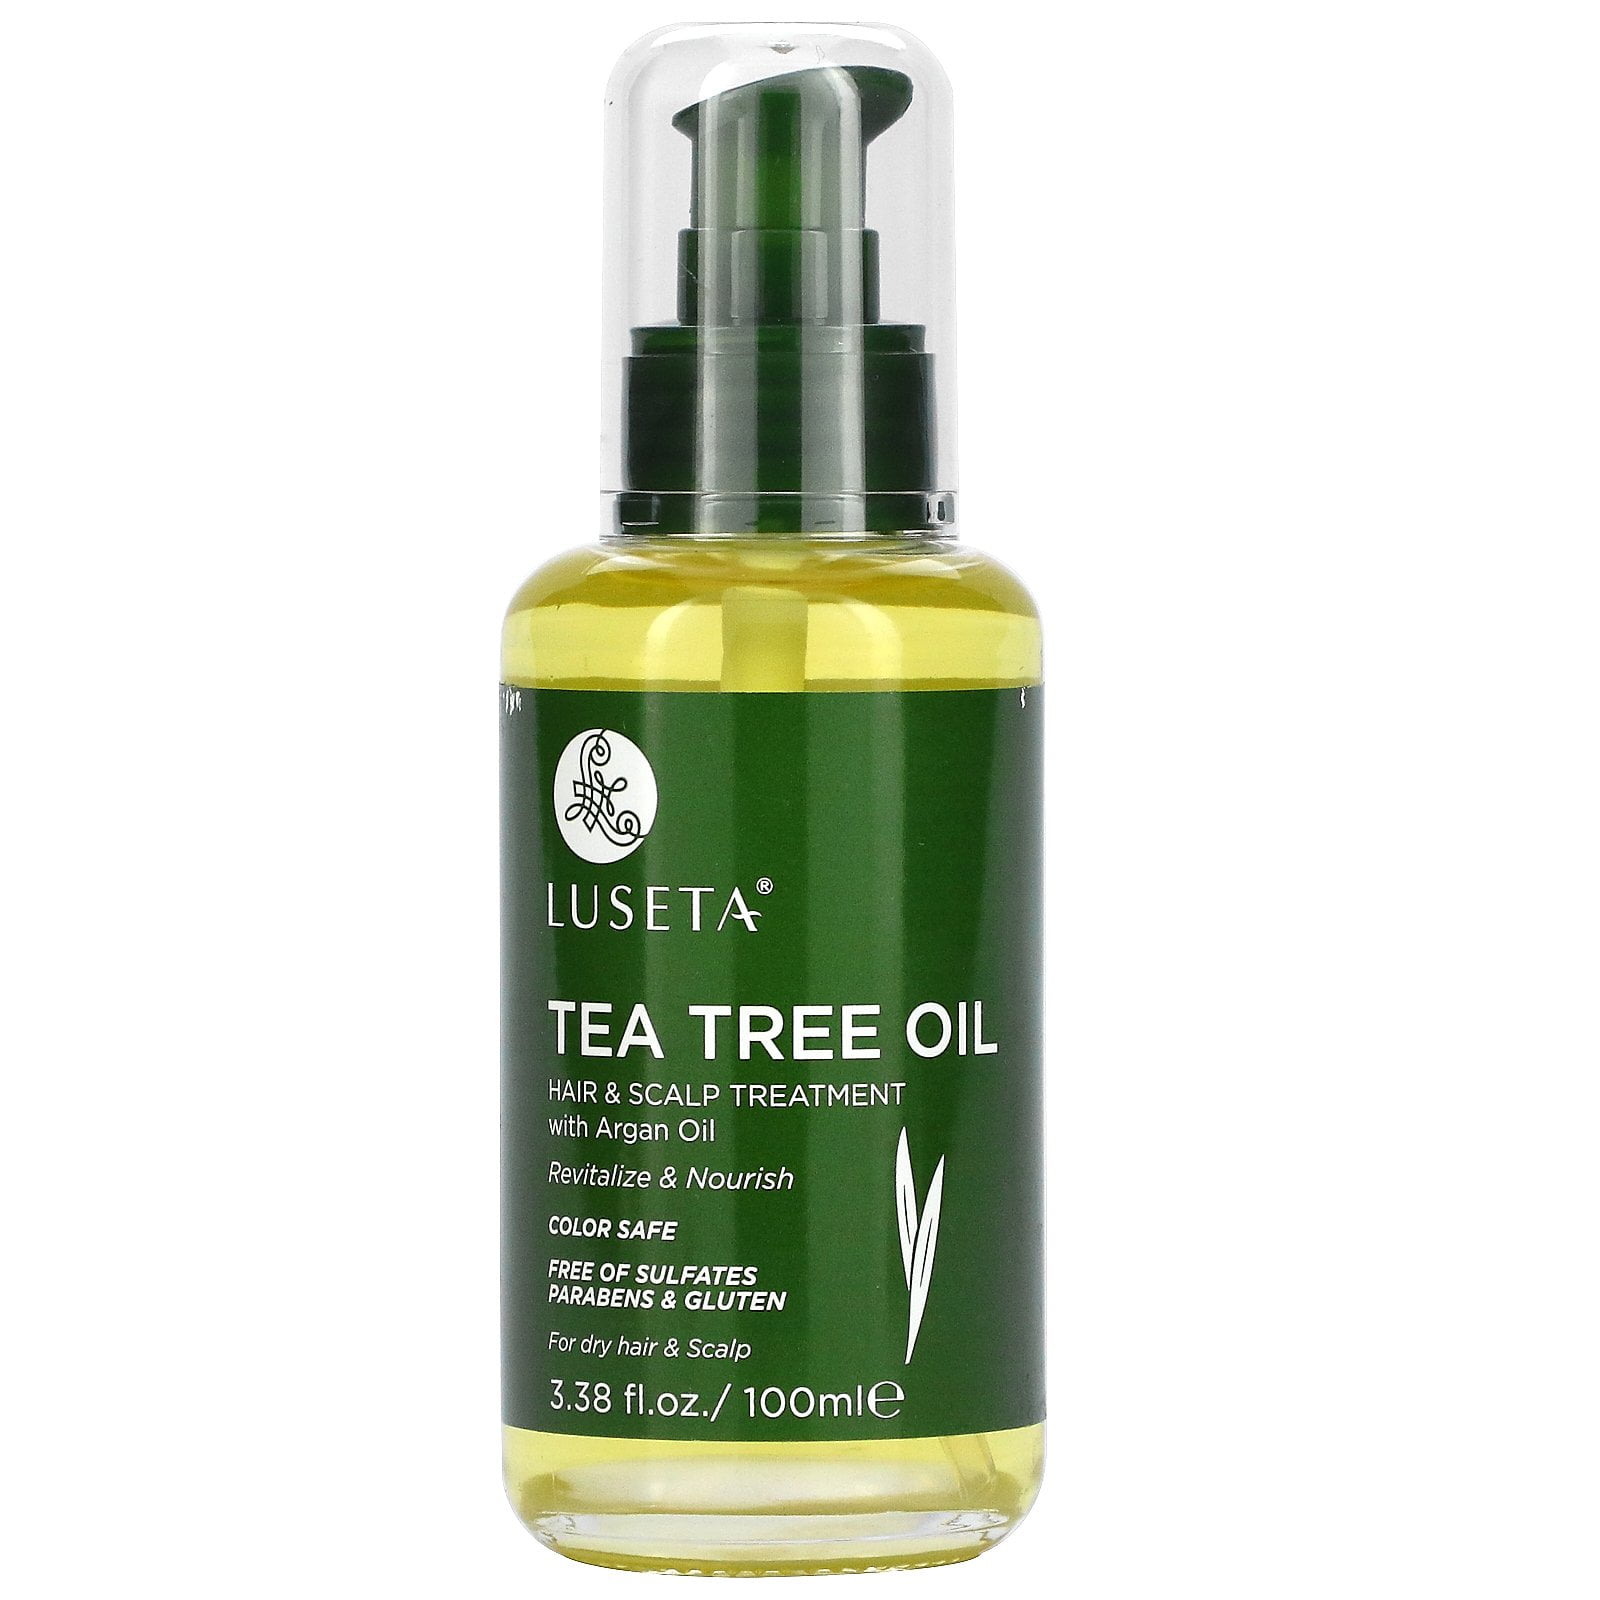 Safety Concerns with Tea Tree Oil?